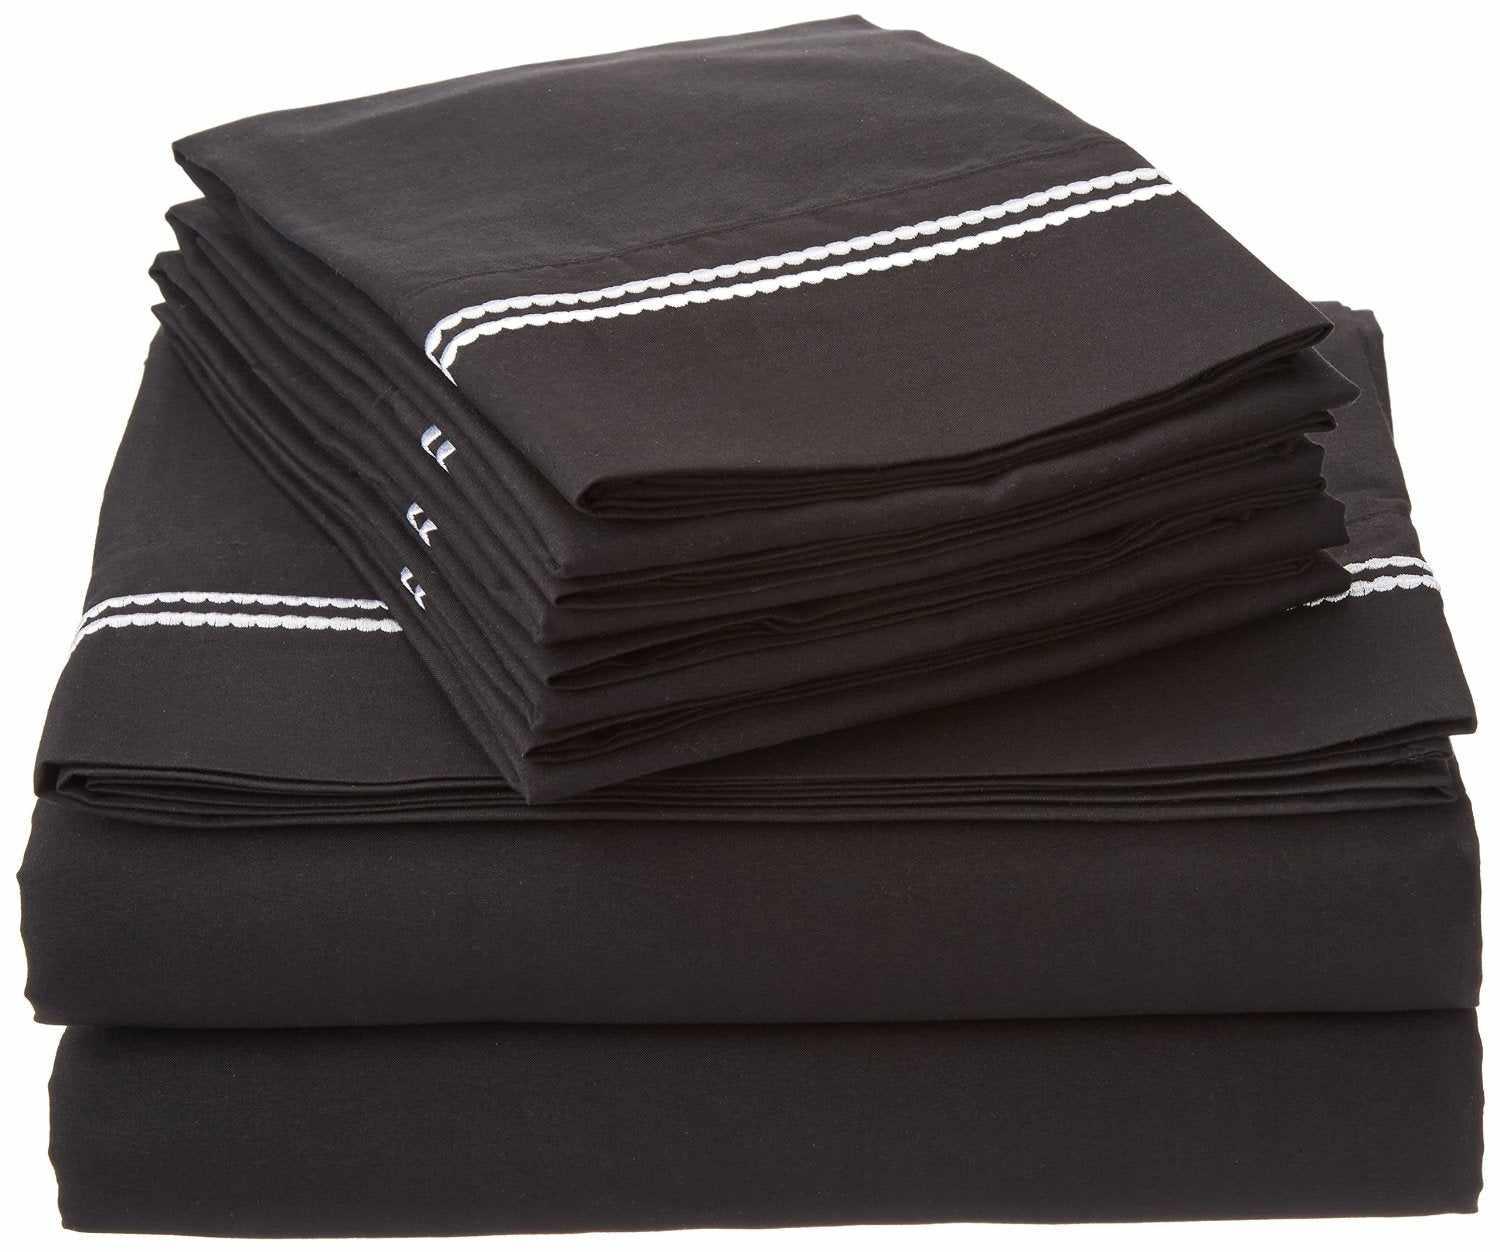 Superior Solid 2-Line Embroidered Trim Wrinkle-Free Microfiber 6 Piece Sheet Set with Extra Pillowcases - Black/Grey